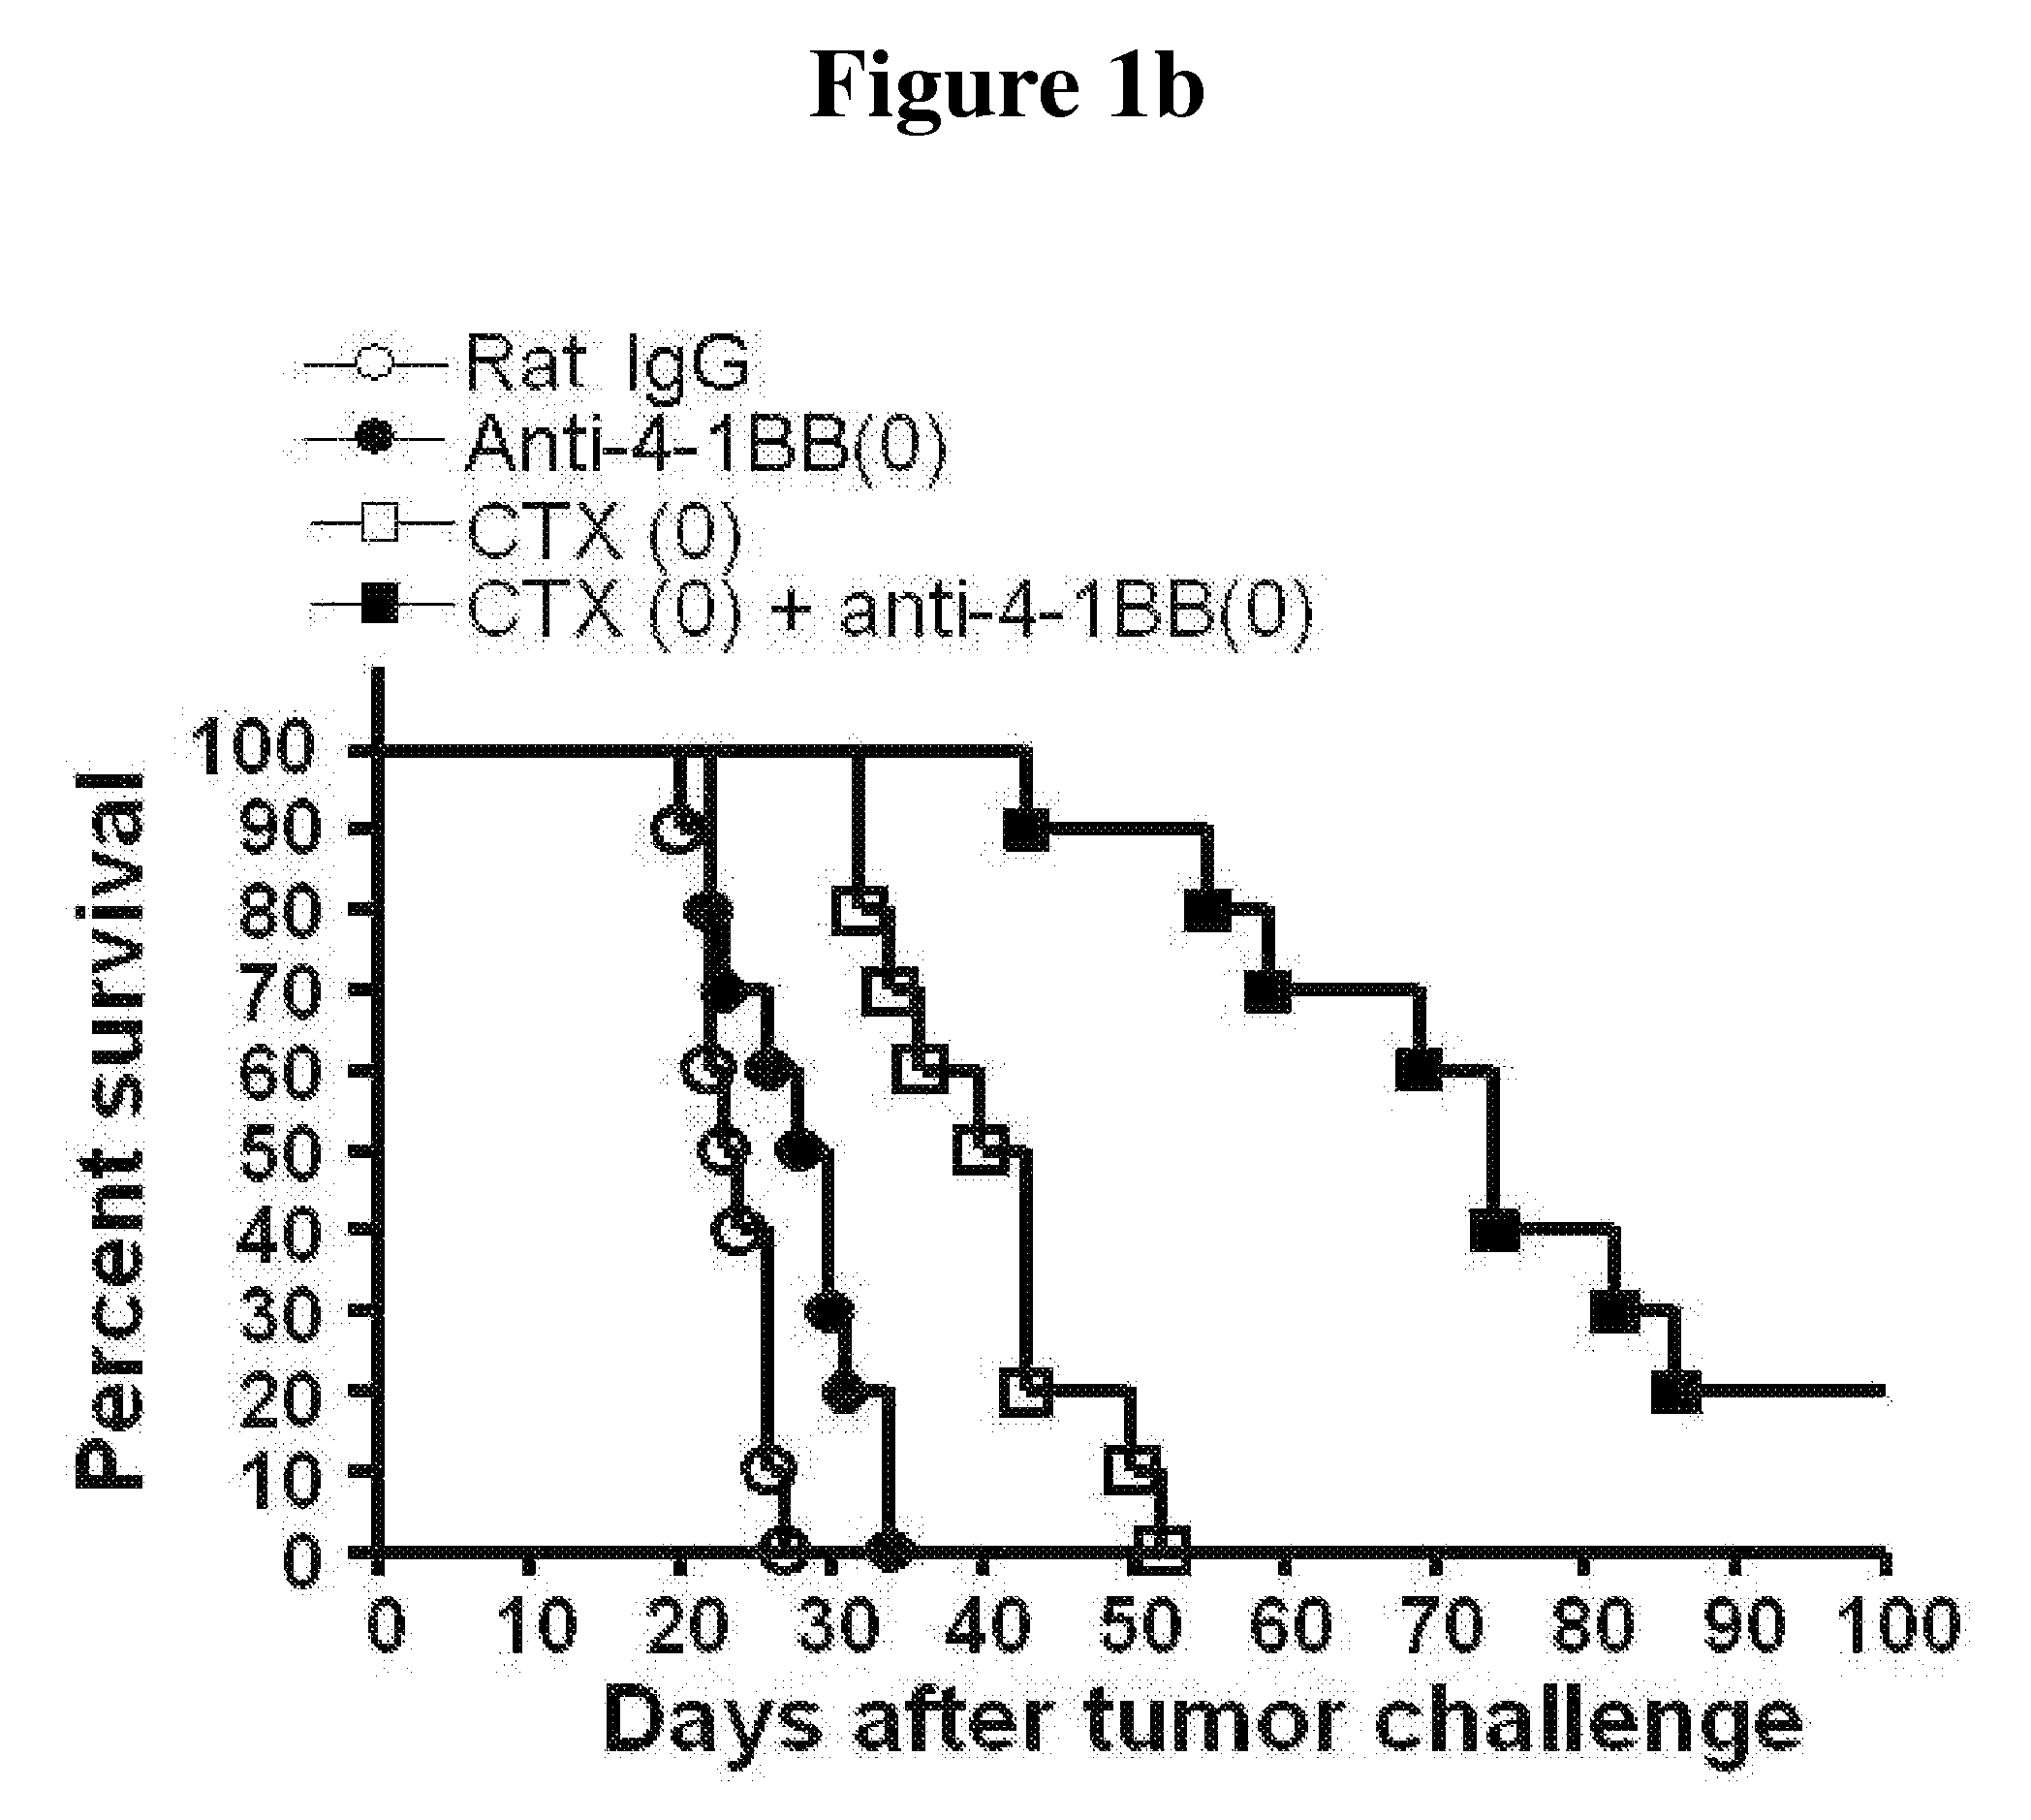 Combined Pharmaceutical Composition Comprising an Anti-4-1BB Monoclonal Antibody and Chemotherapeutic Anti-Cancer Agent for Preventing and Treating Cancer Disease